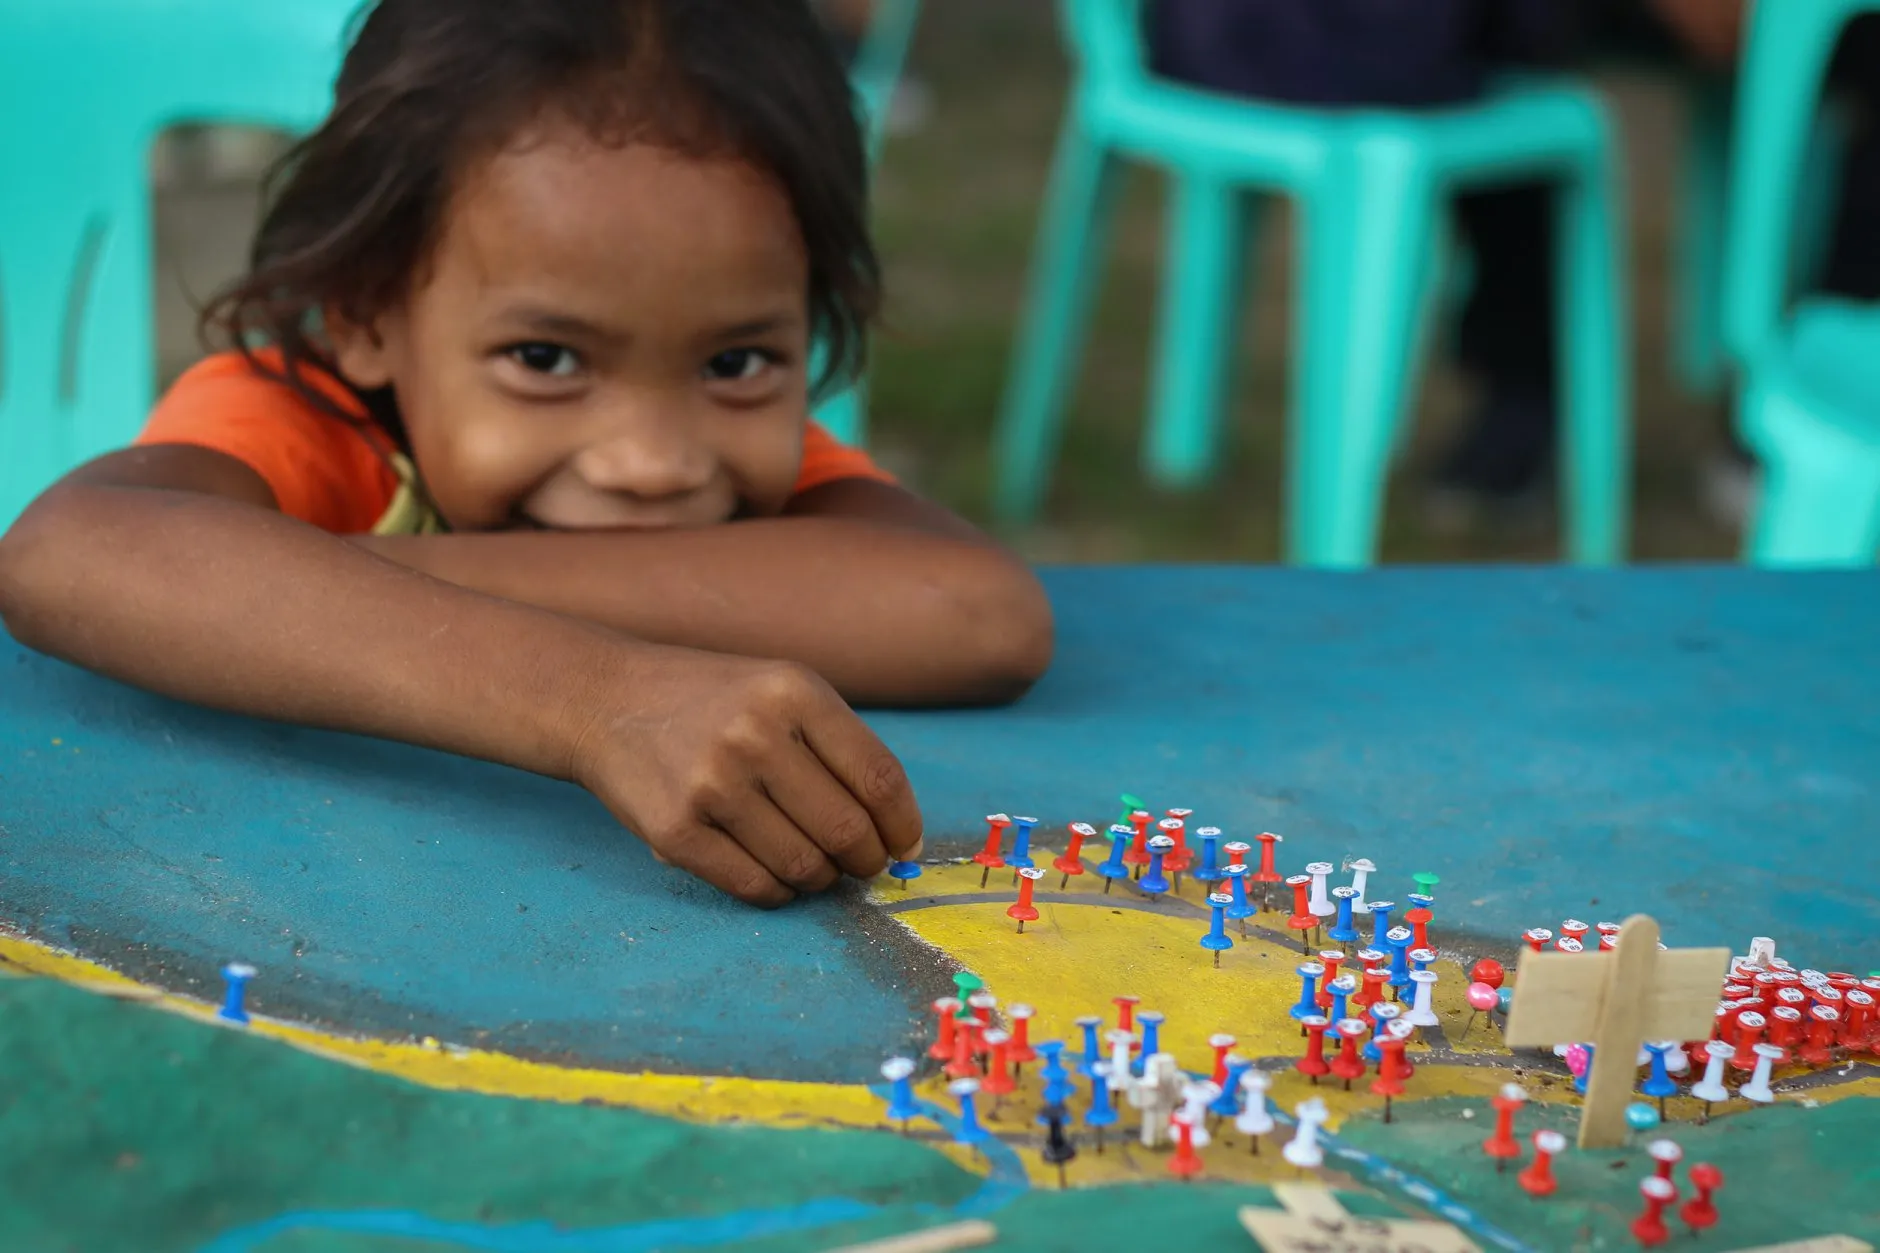 A girl smiles while looking at a map on a table